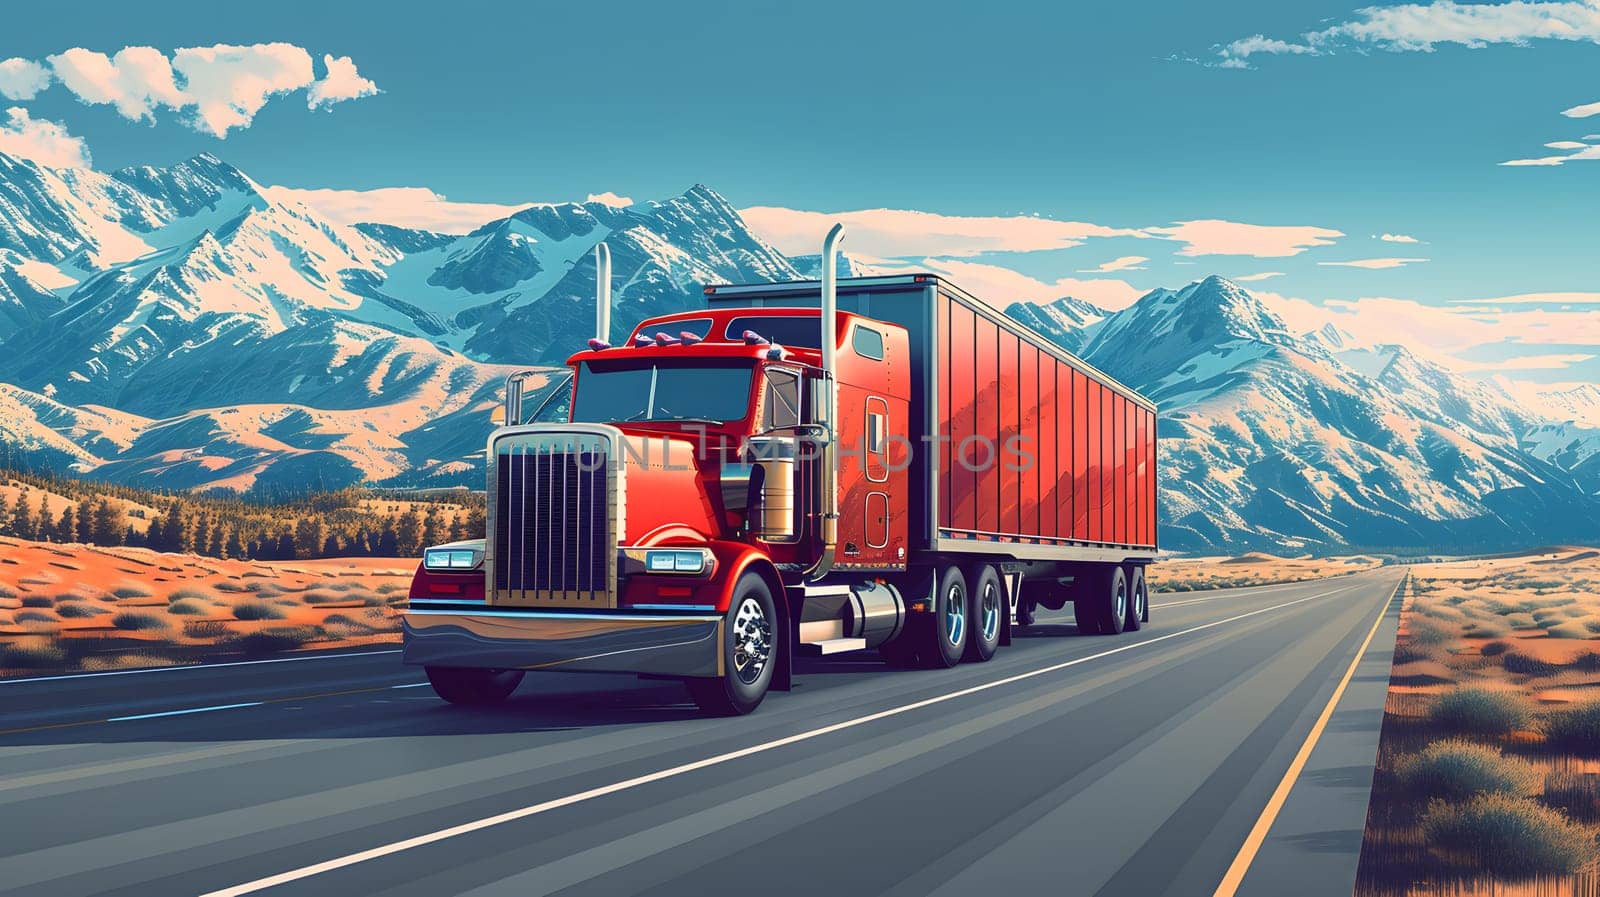 A red semi truck is cruising down the highway, its wheels rolling on the asphalt road surface, with mountains and a snowy sky in the background